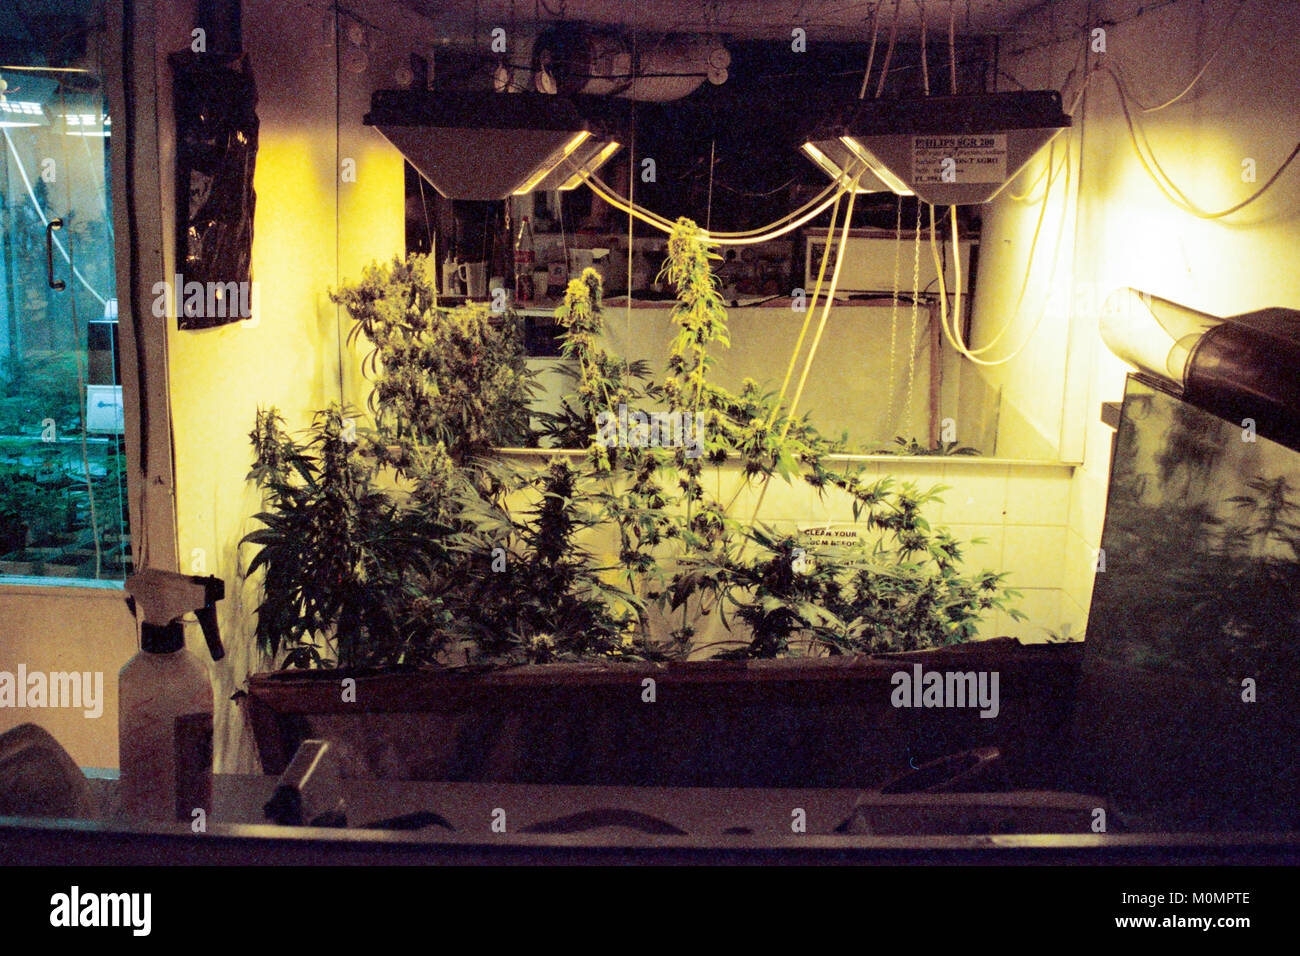 Cannabis plants growing at the museum of marijuana in Amsterdam, Netherlands. Stock Photo